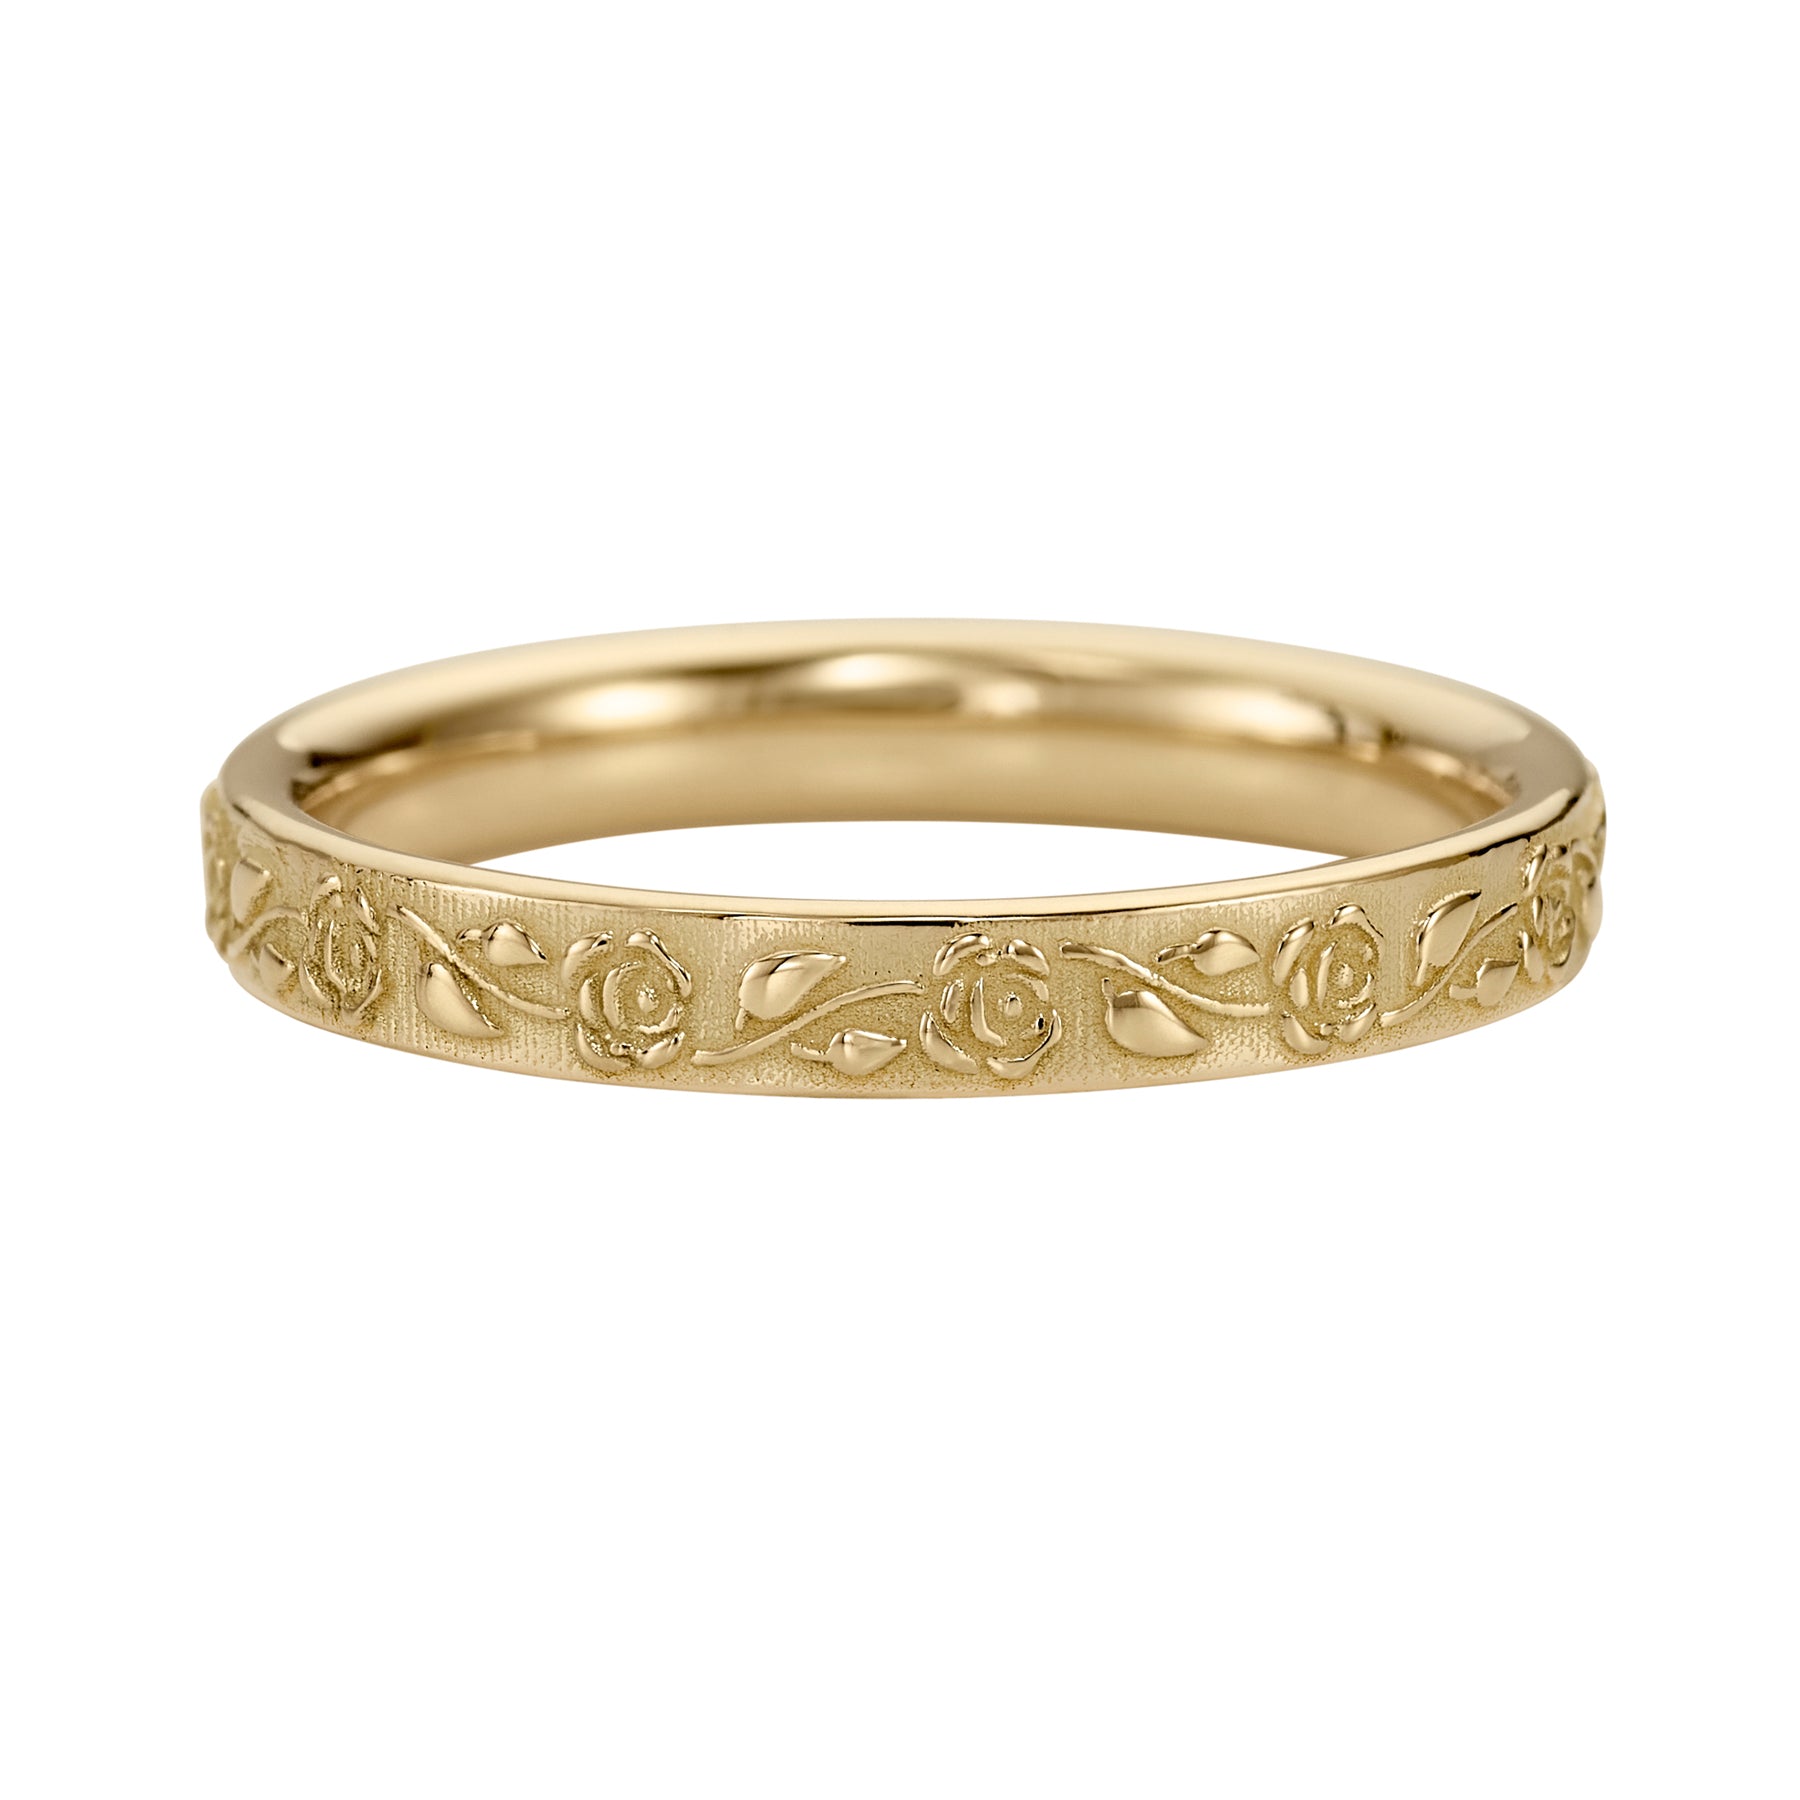 Buy White Gold Band Rings Designs Online in India | Candere by Kalyan  Jewellers